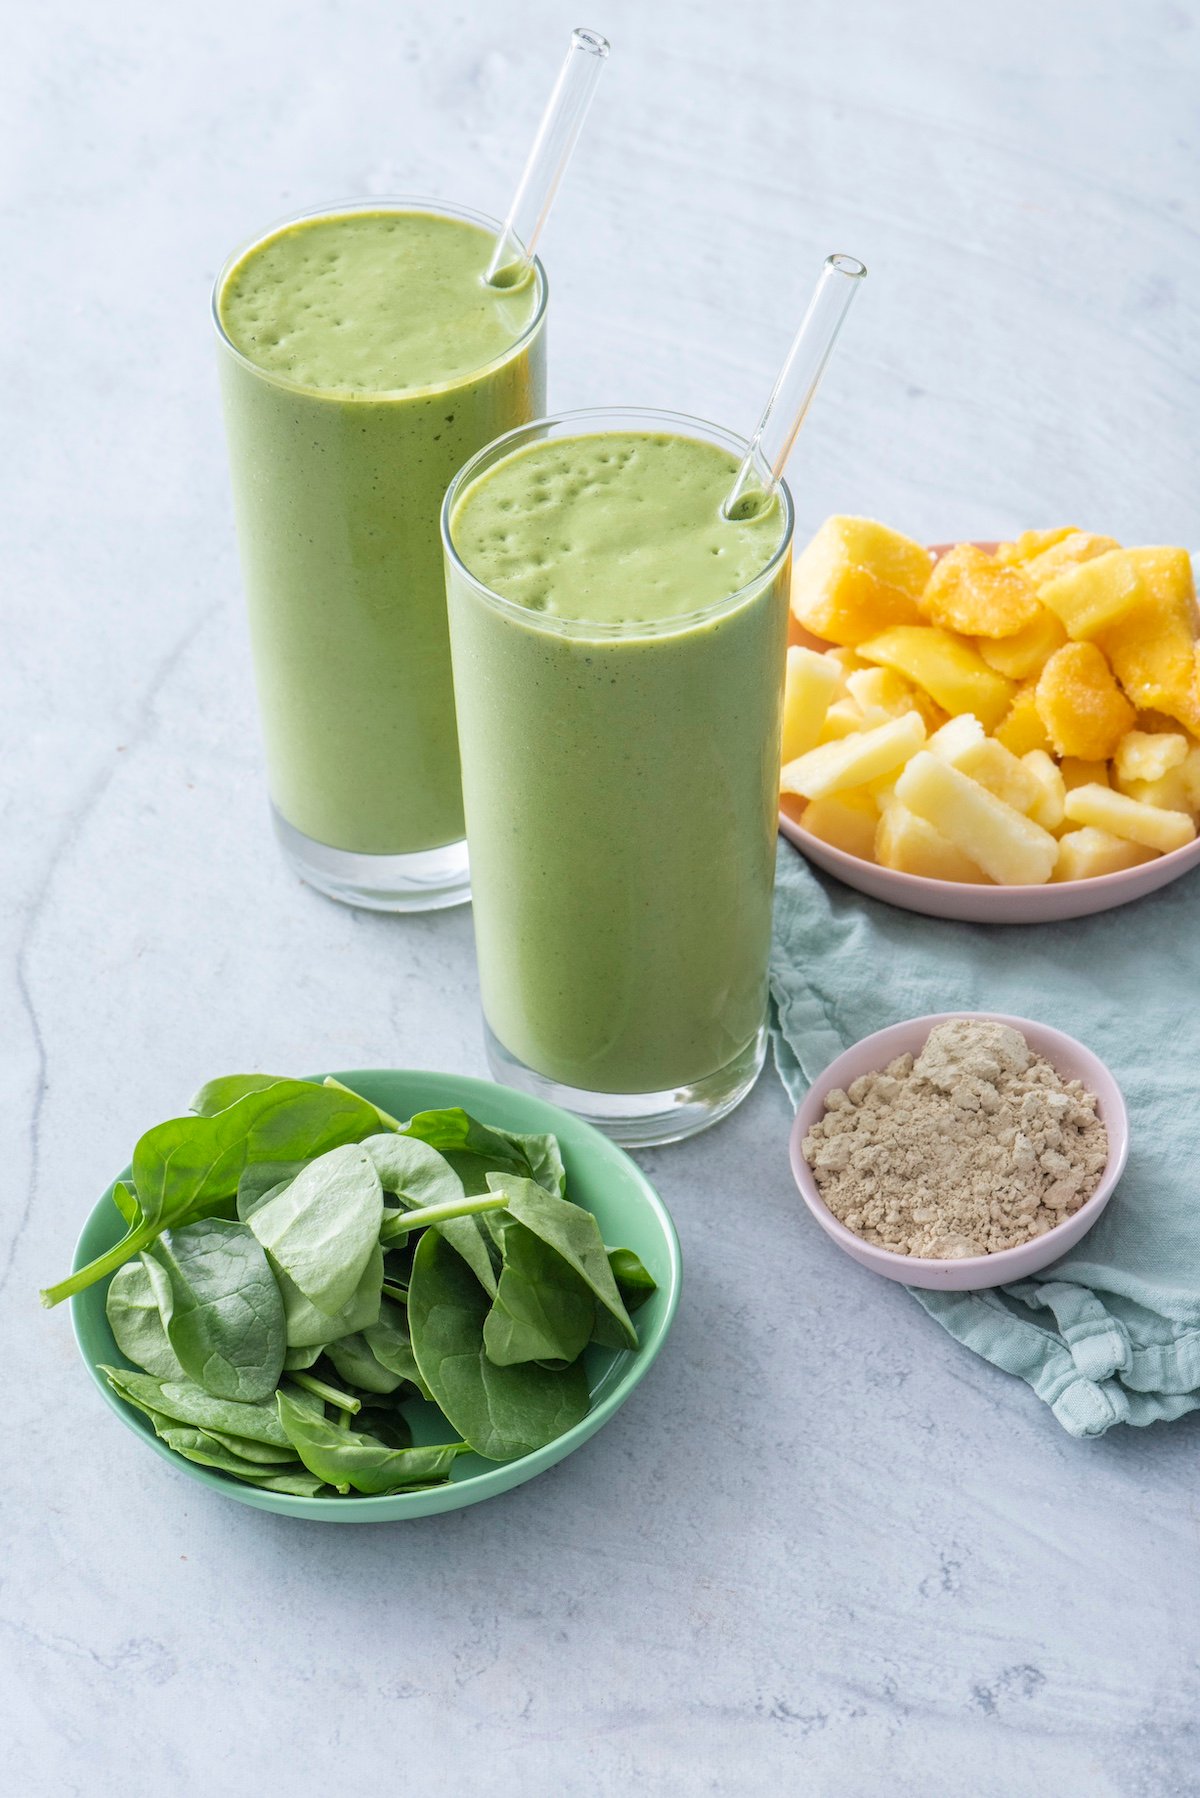 Two glasses filled with green smoothies. Ingredients like mango, pineapple, protein powder and spinach surround the glasses.